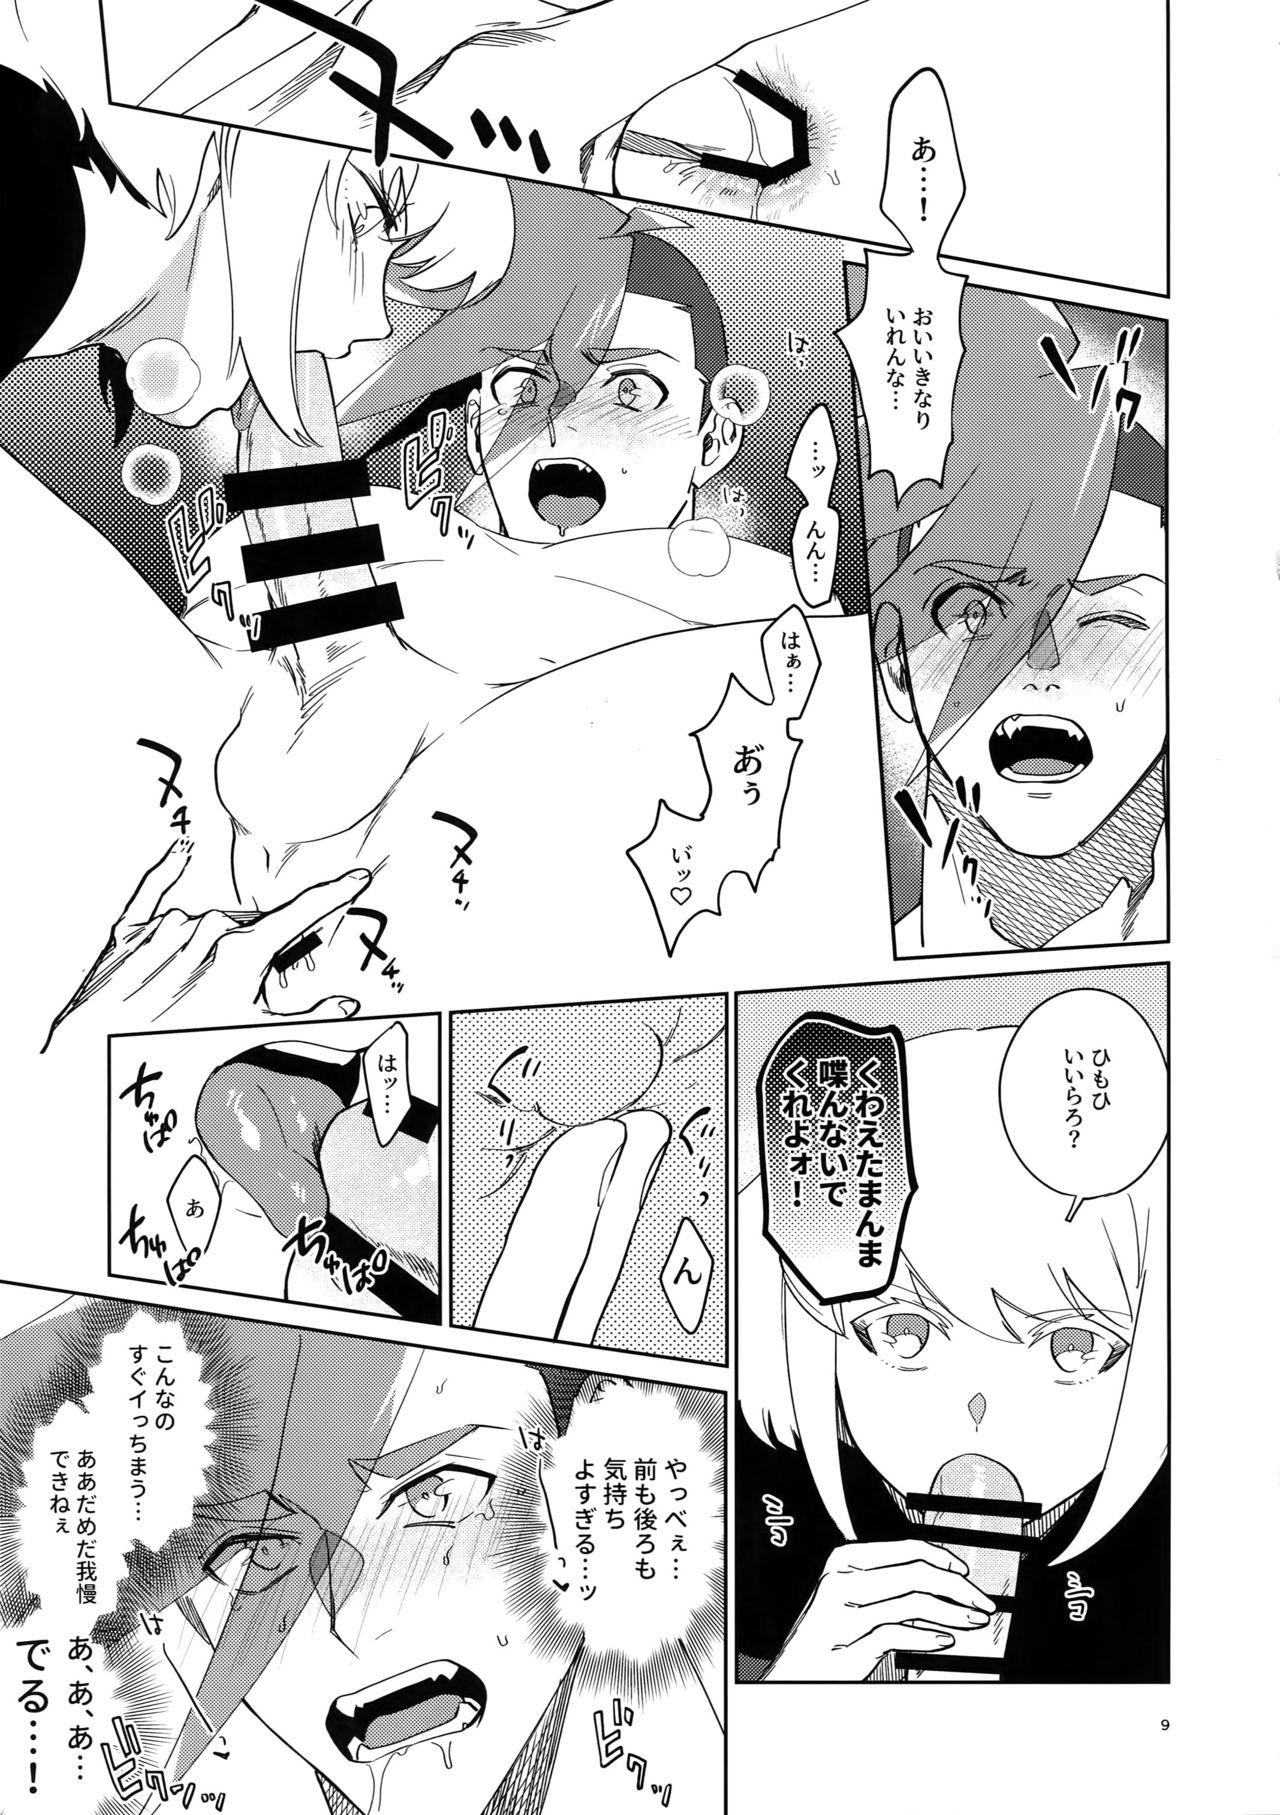 Menage One and Only - Promare Czech - Page 8